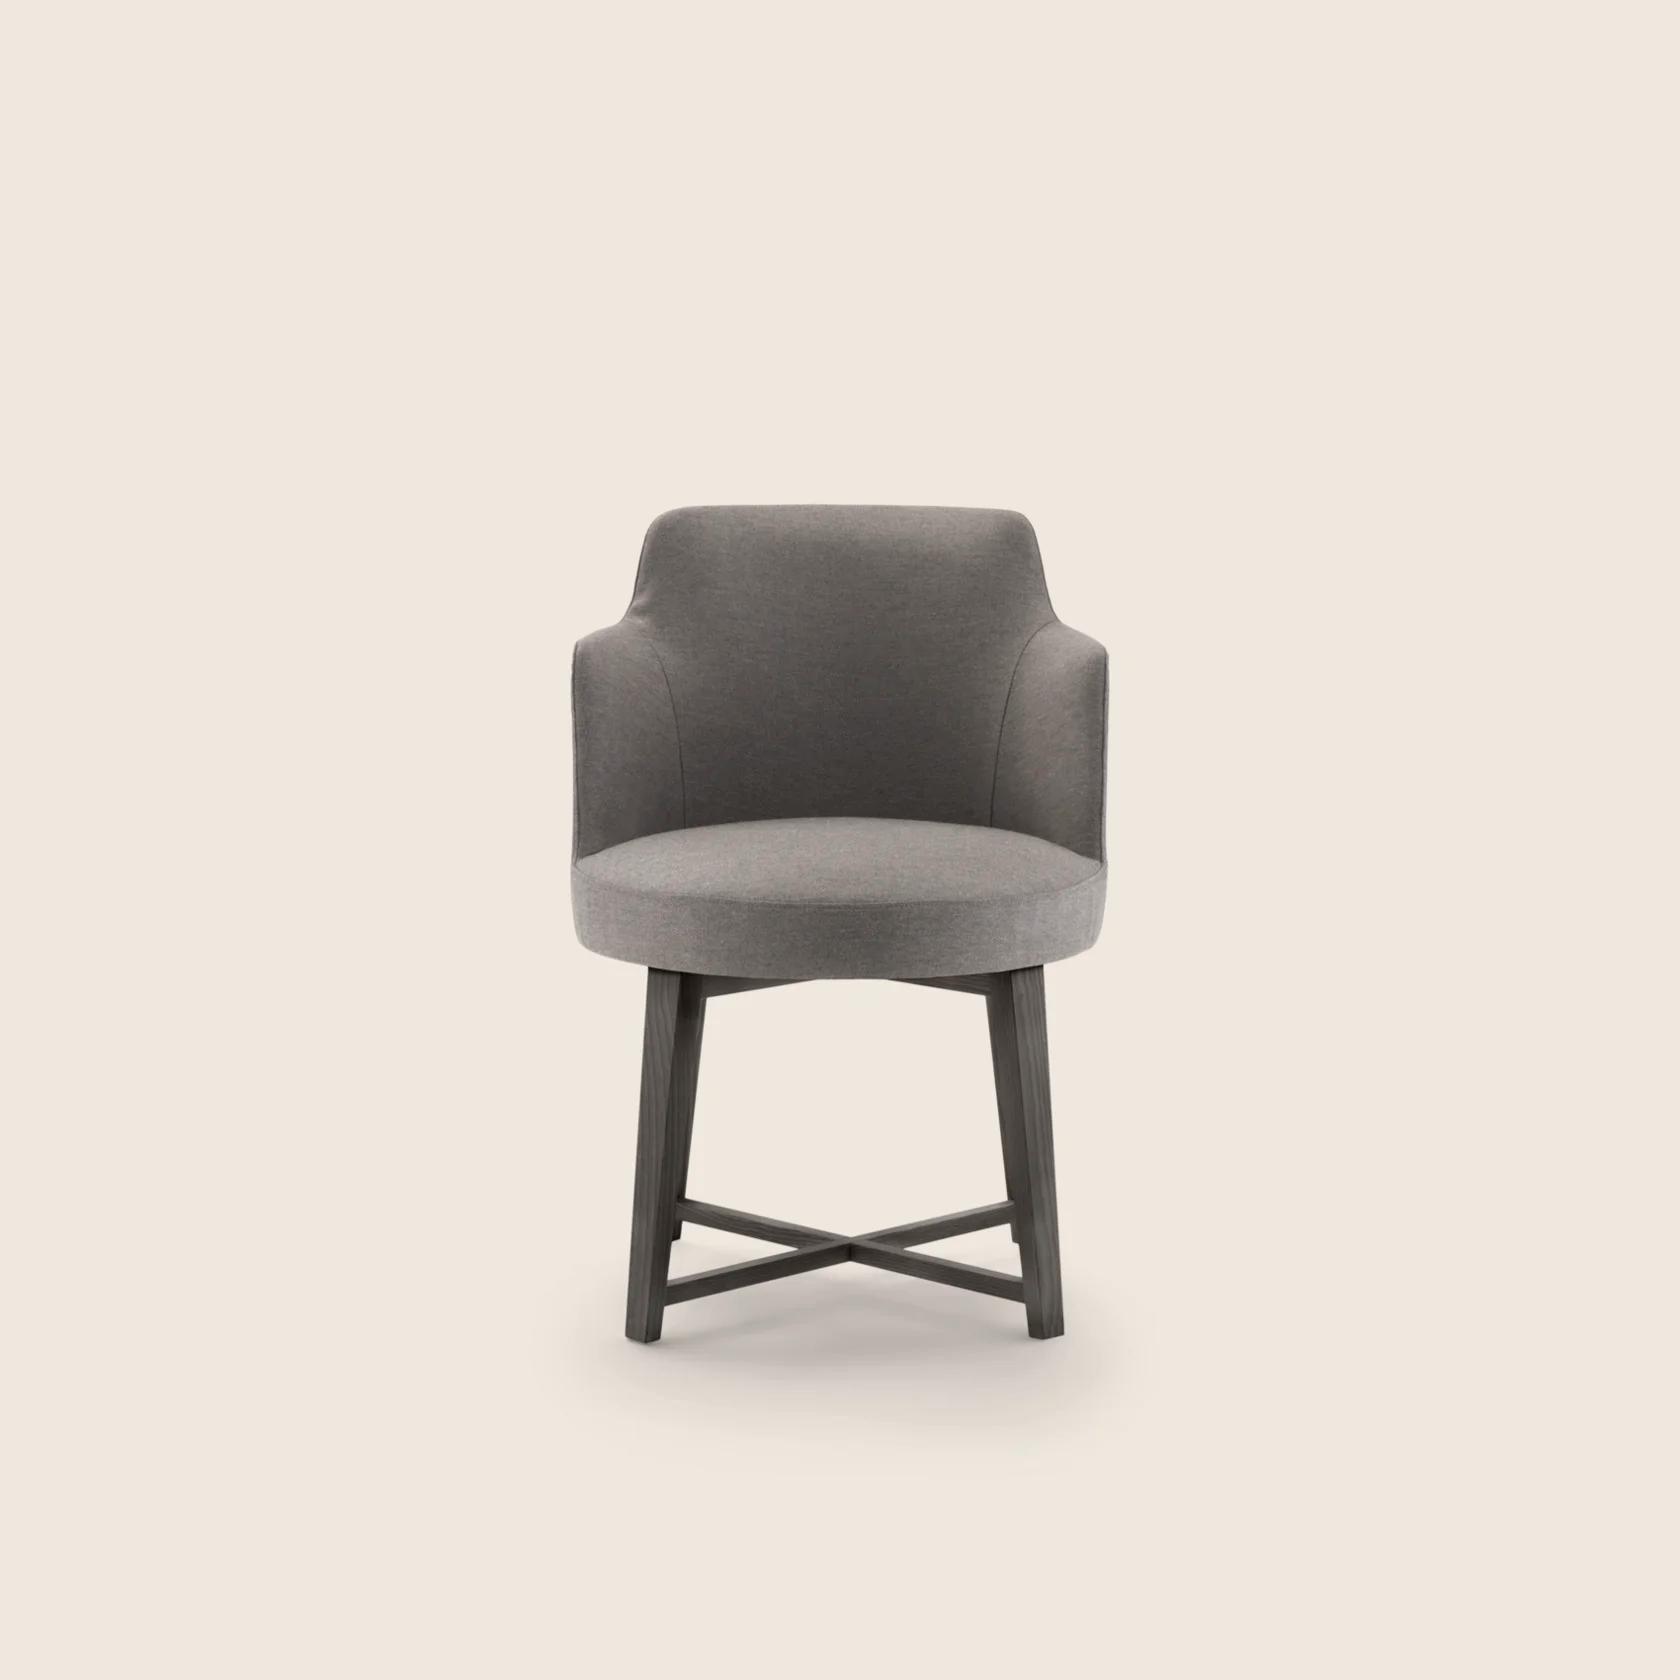 024601_HERA_CHAIR_04.png